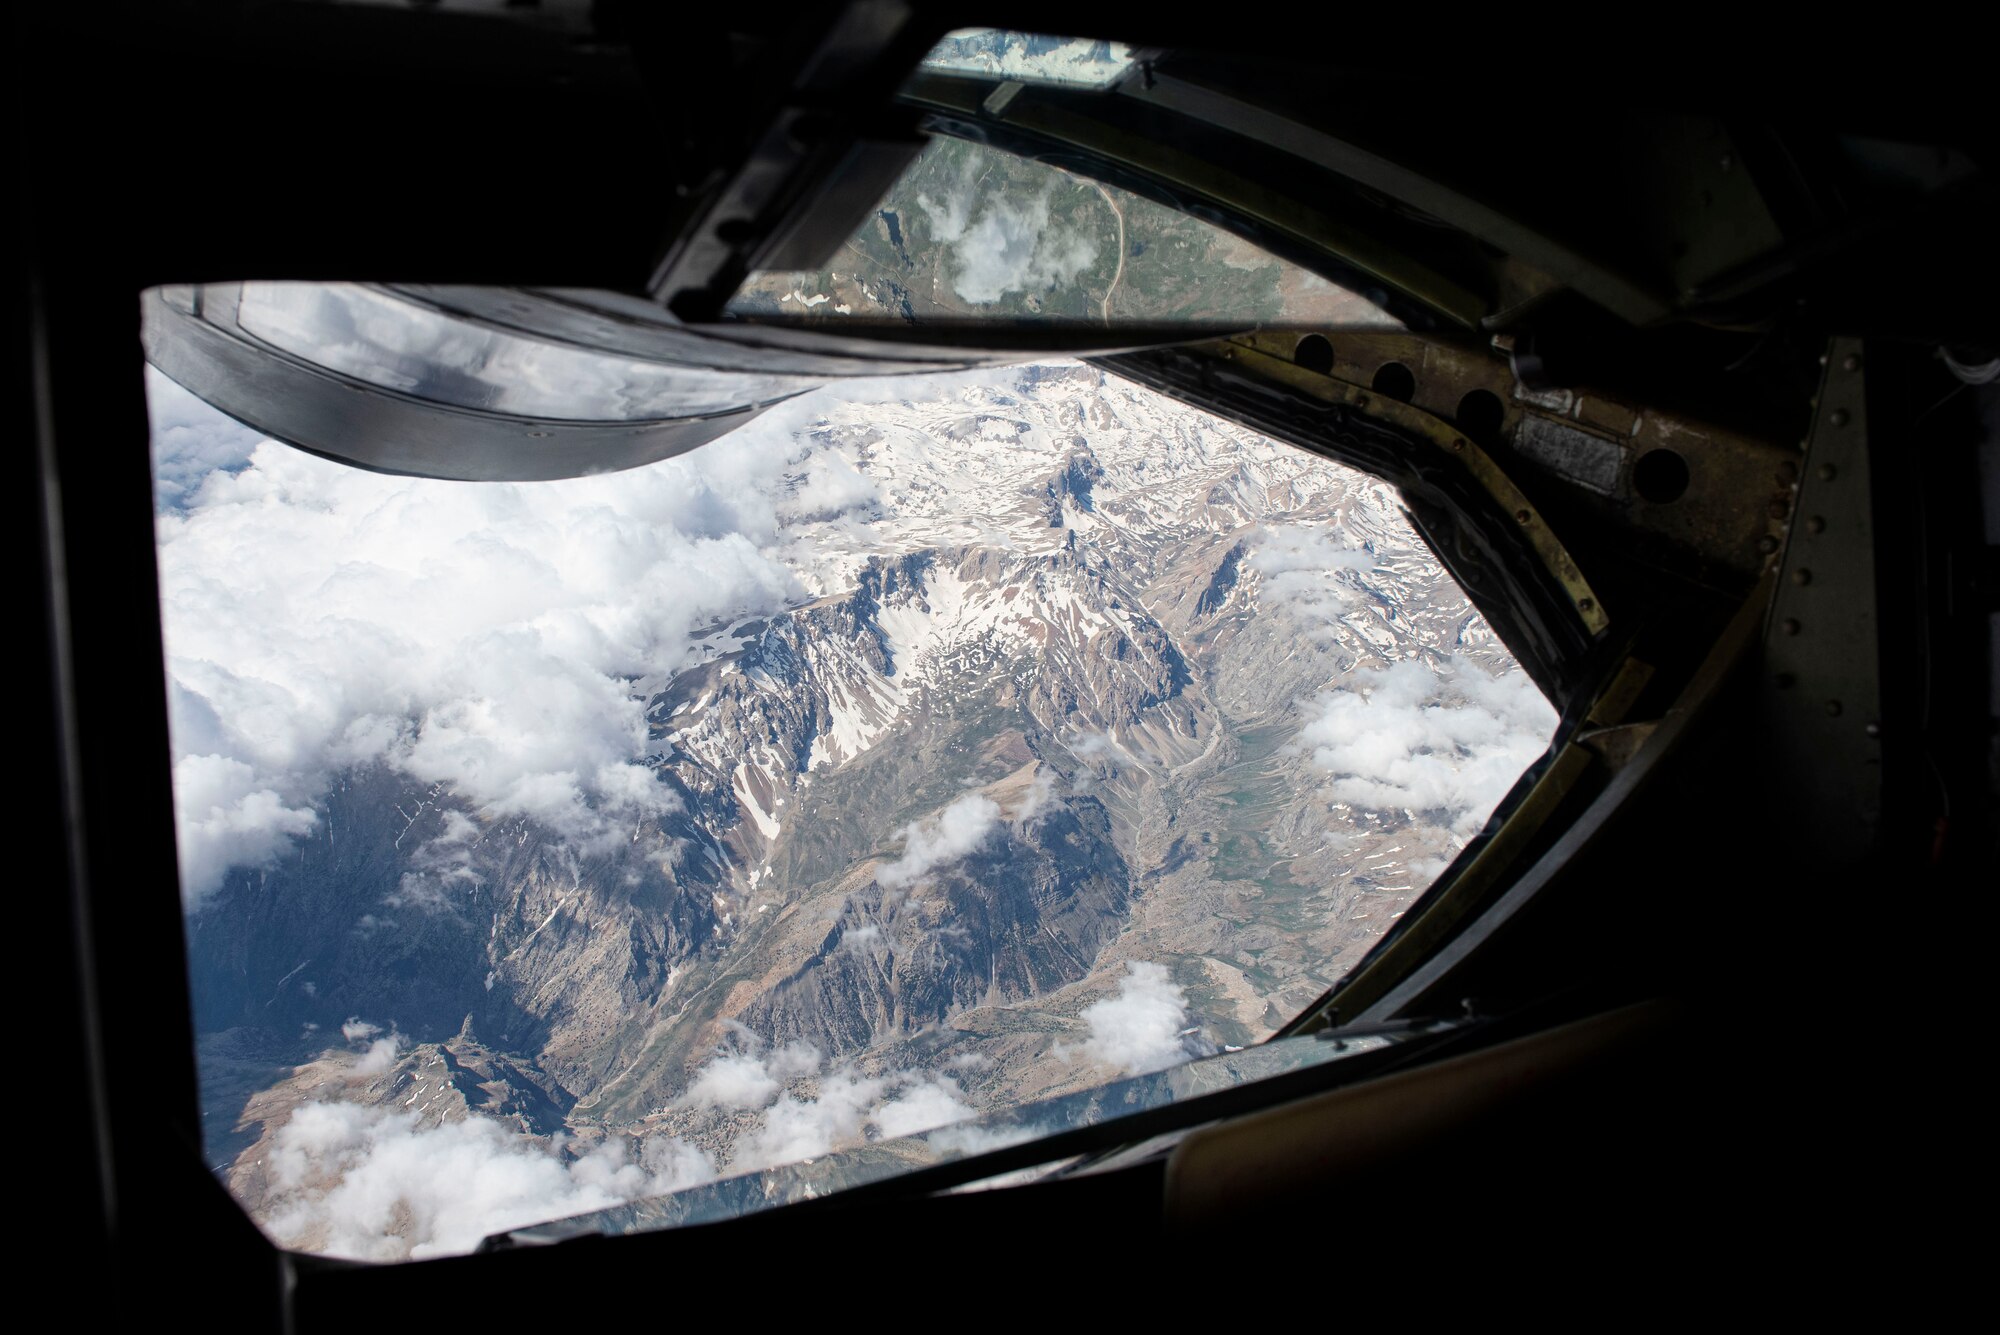 A mountain range is seen from a U.S. KC-135 Stratotanker assigned to 22nd Expeditionary Air Refueling Squadron during a training flight over Turkey, May 29, 2020. The transatlantic strategic relationship between the U.S. and Europe has been forged throughout the past seven decades, and it is built on a foundation of shared values, experiences, and vision. (U.S. Air Force photo by Staff Sgt. Joshua Magbanua)